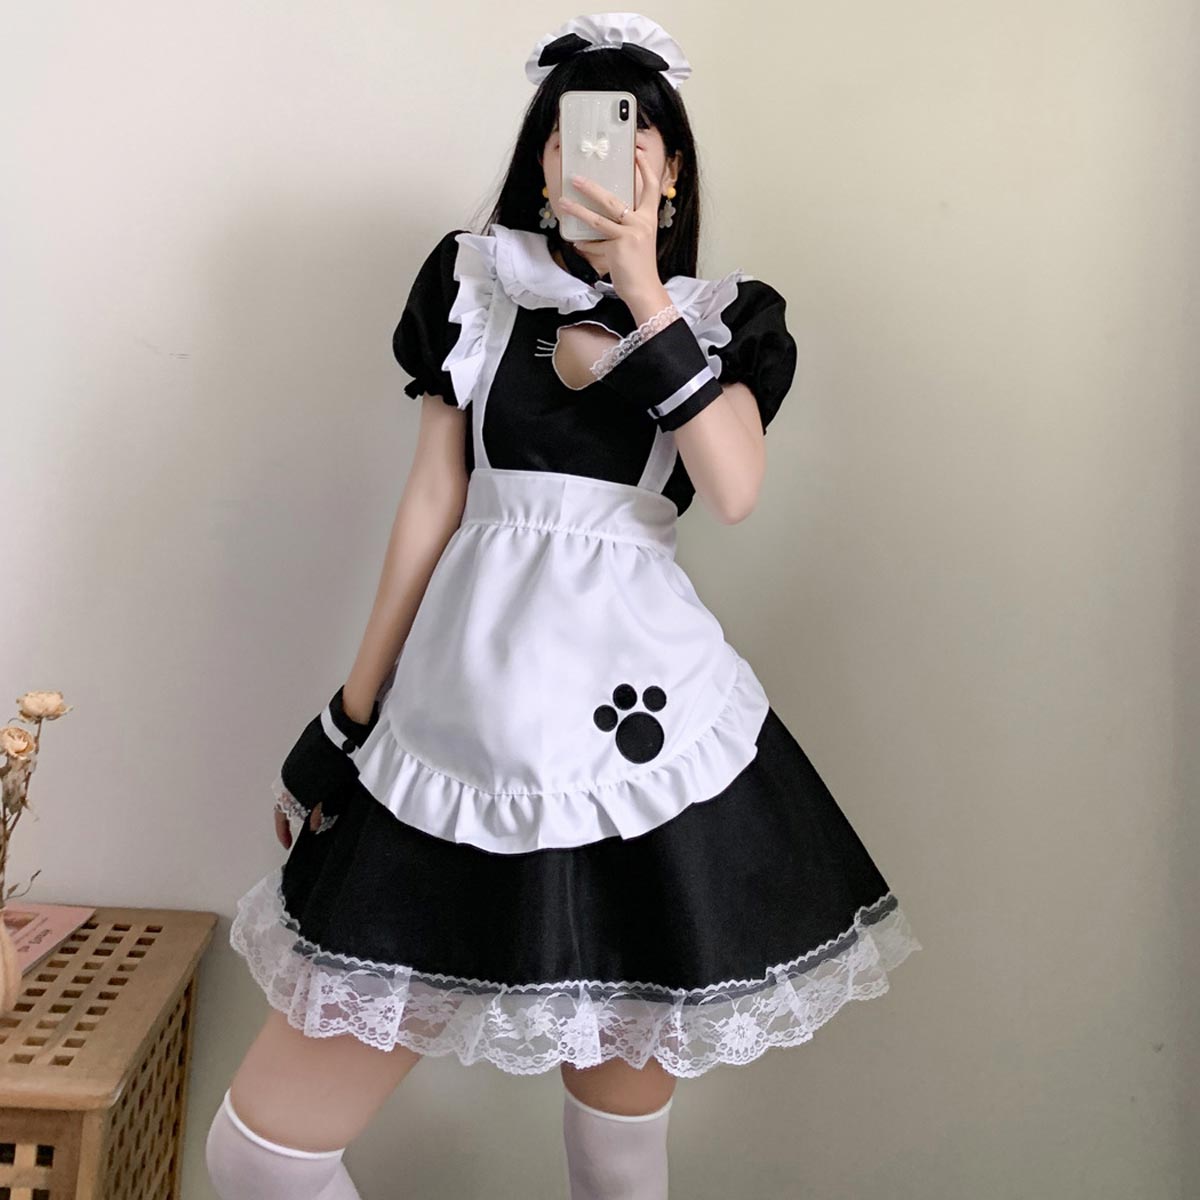 Black Puff Sleeve Ruffles One Piece Dress With Apron And Headpieces